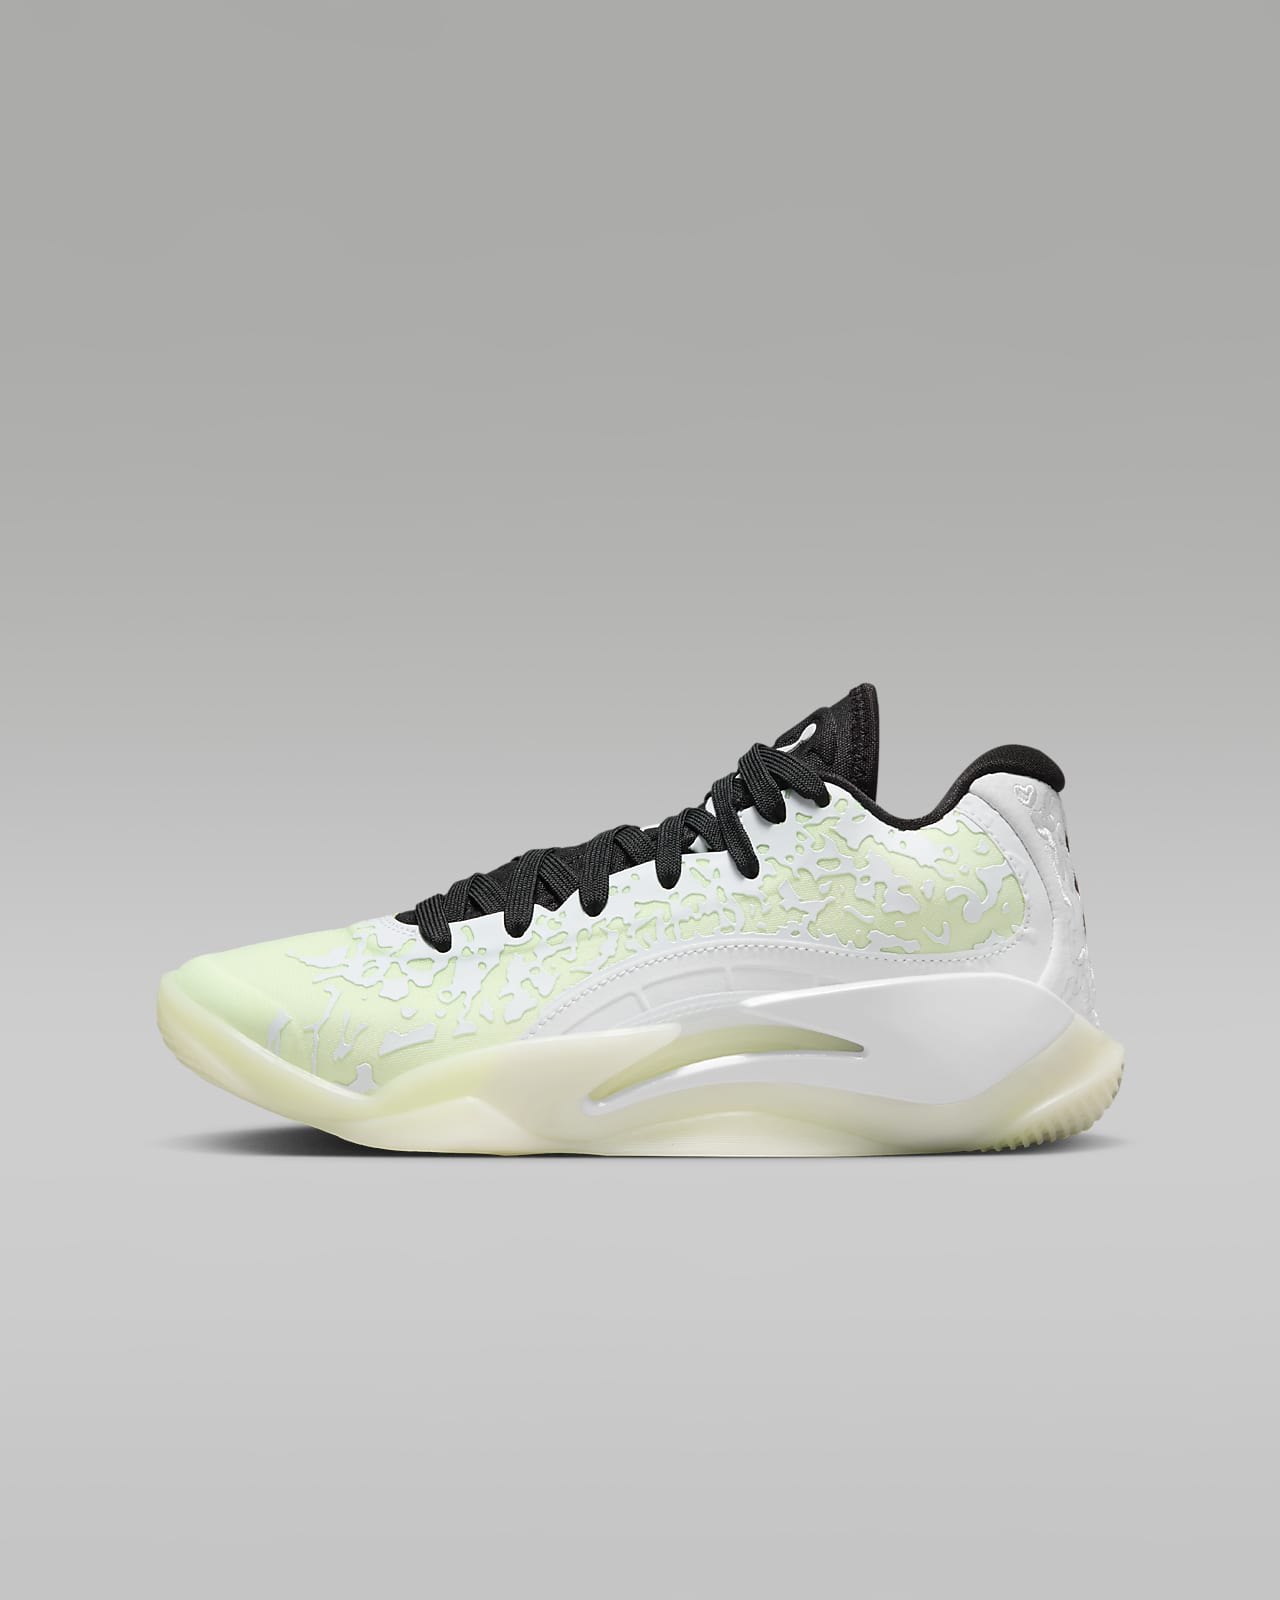 Are Puma Basketball Shoes Good for Wide Feet? Discover the Perfect Fit!